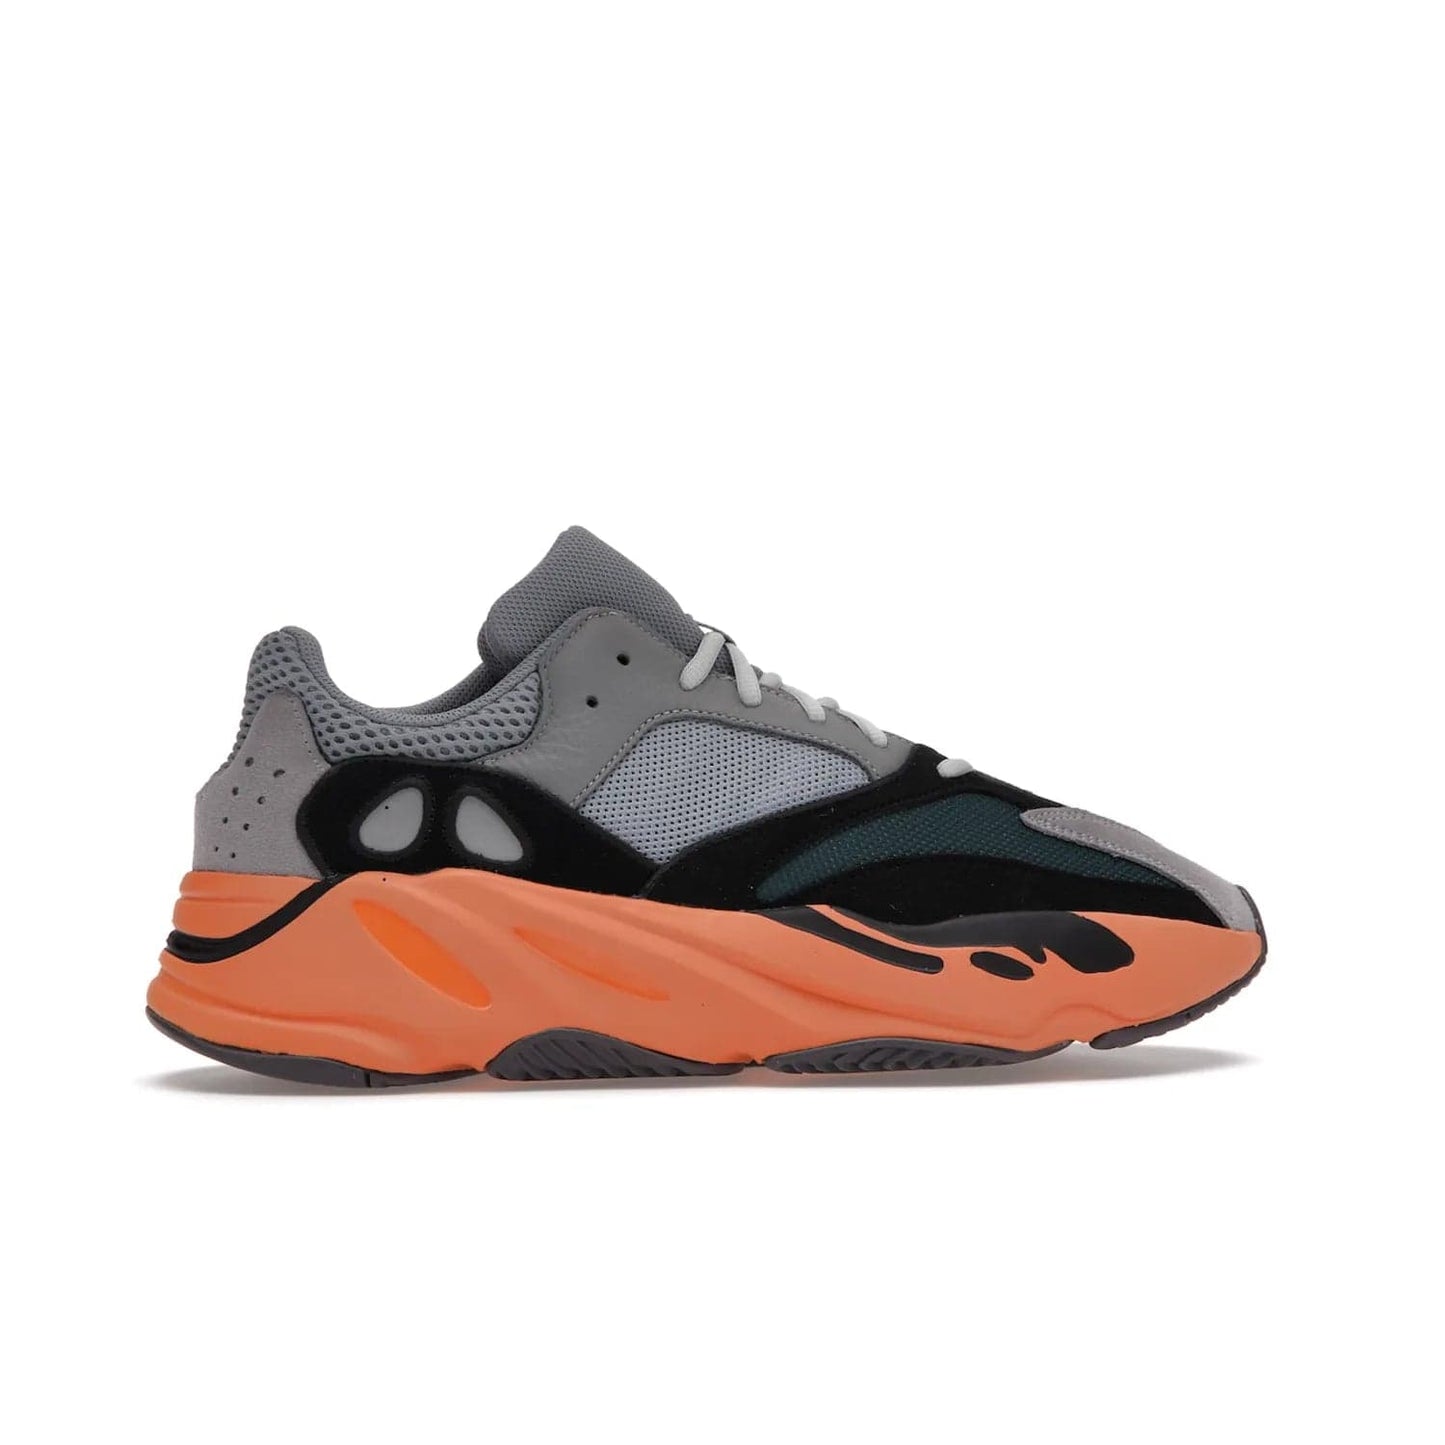 adidas Yeezy Boost 700 Wash Orange - Image 36 - Only at www.BallersClubKickz.com - Introducing the adidas Yeezy Boost 700 Wash Orange. Unique grey leather, suede, mesh upper and teal panels with a chunky Wash Orange Boost midsole. Release October 2021, make a statement today!